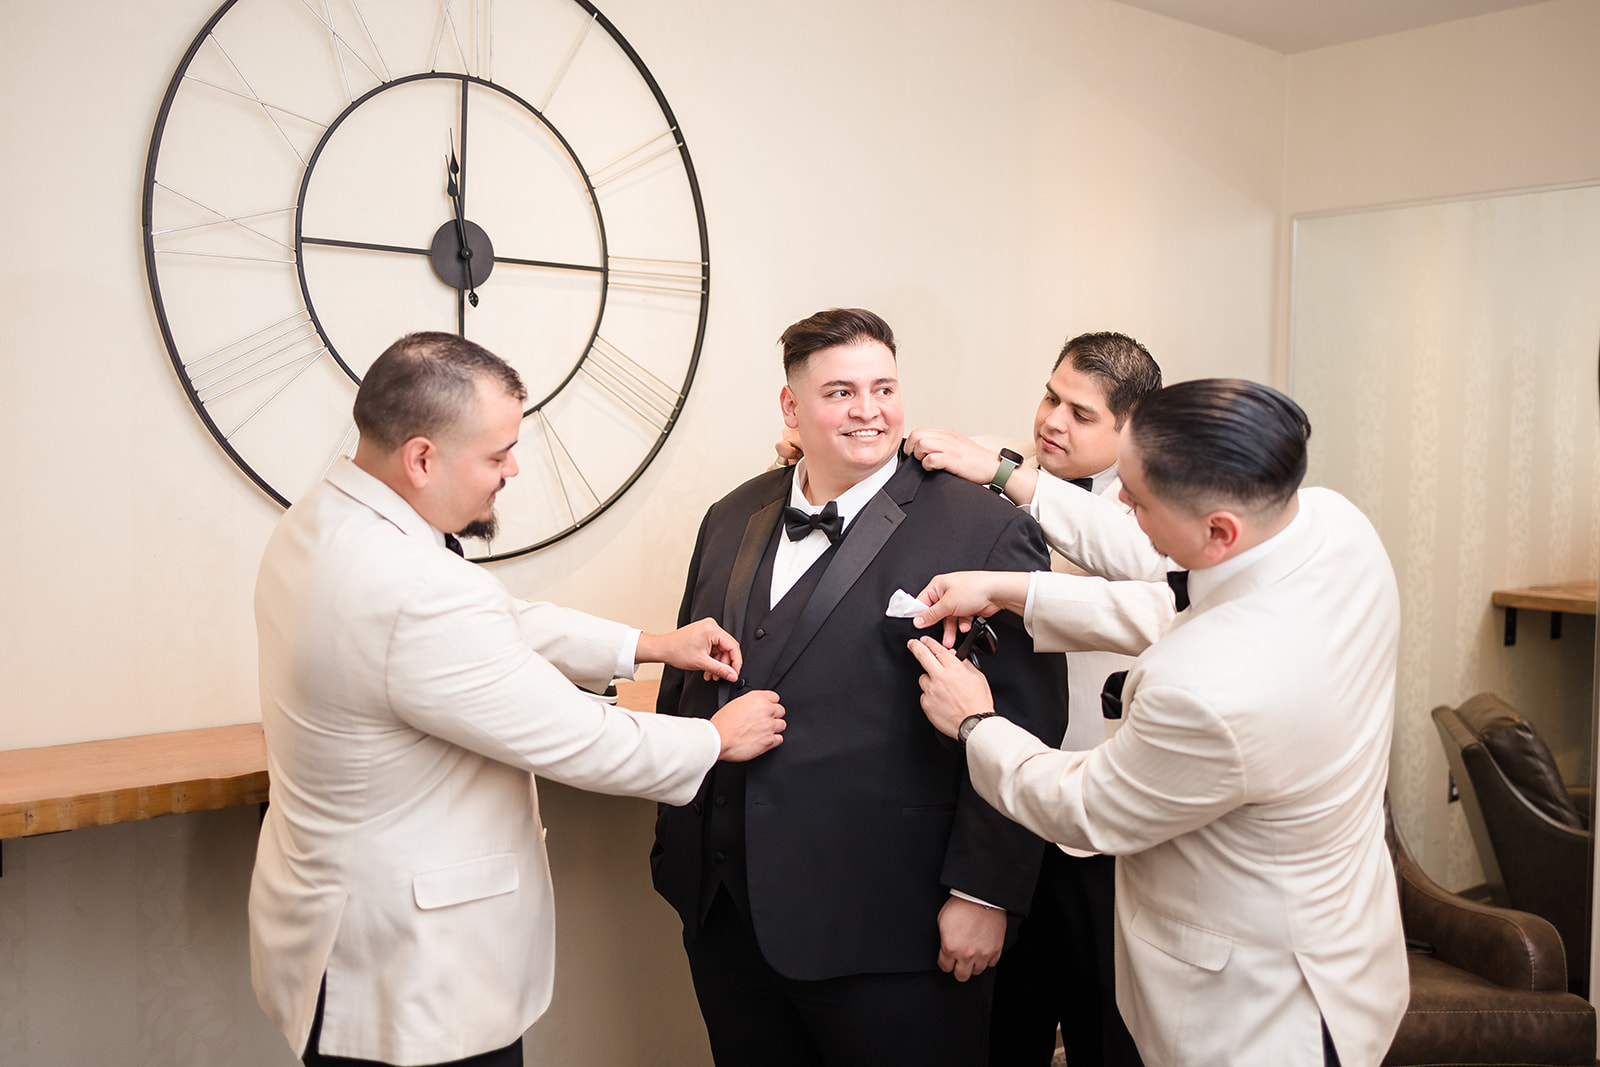 Groomsmen help the groom put on the finishing touches before his wedding